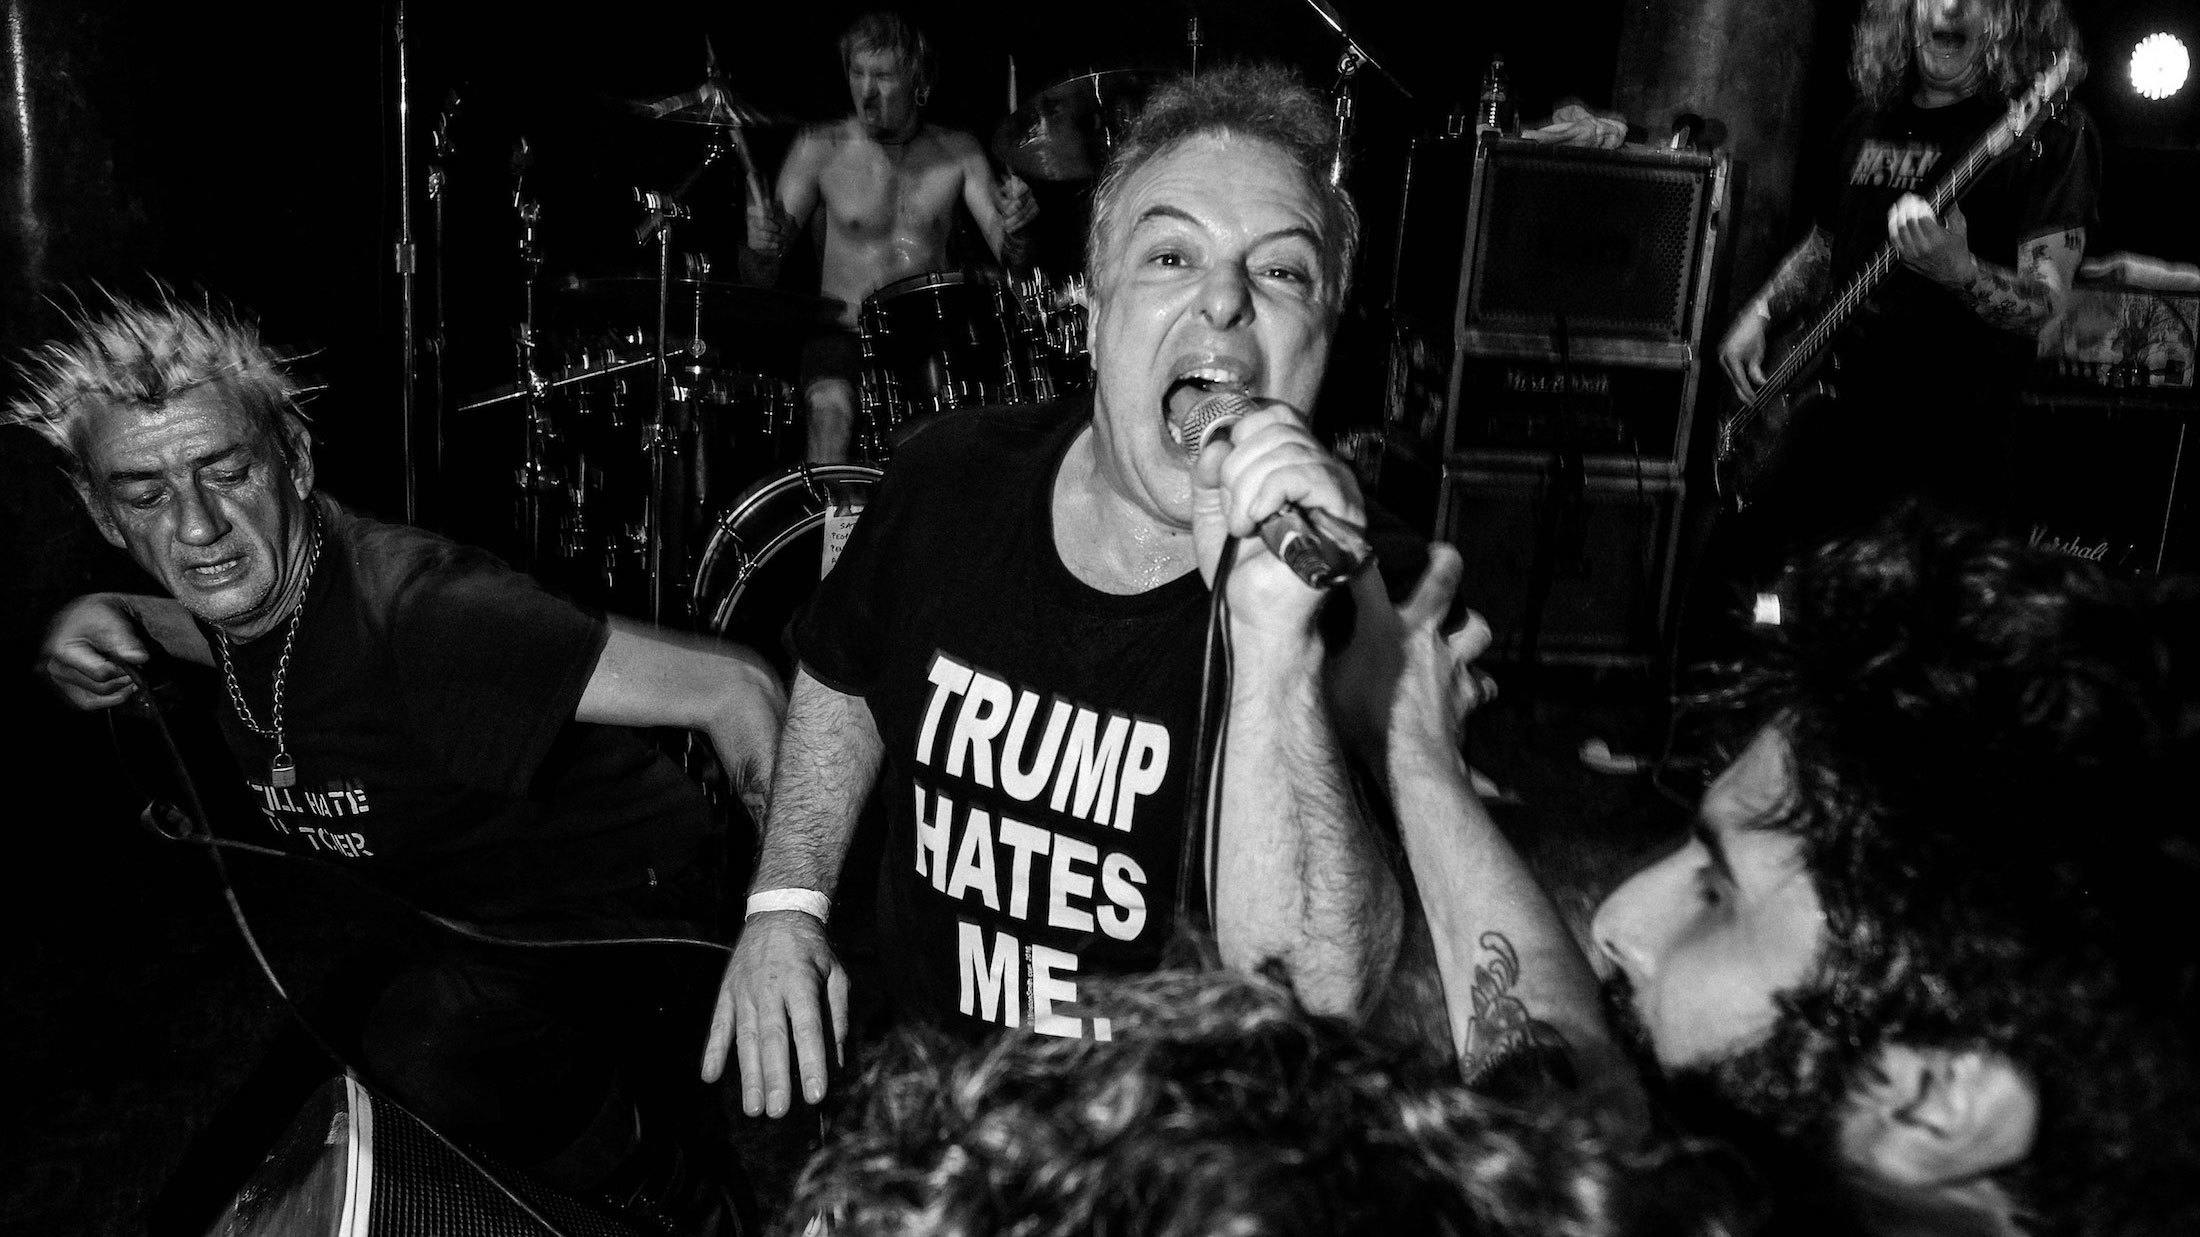 Jello Biafra: “I'm not a drug addict, I'm not religious, music is my higher power, and I never know what's coming next”